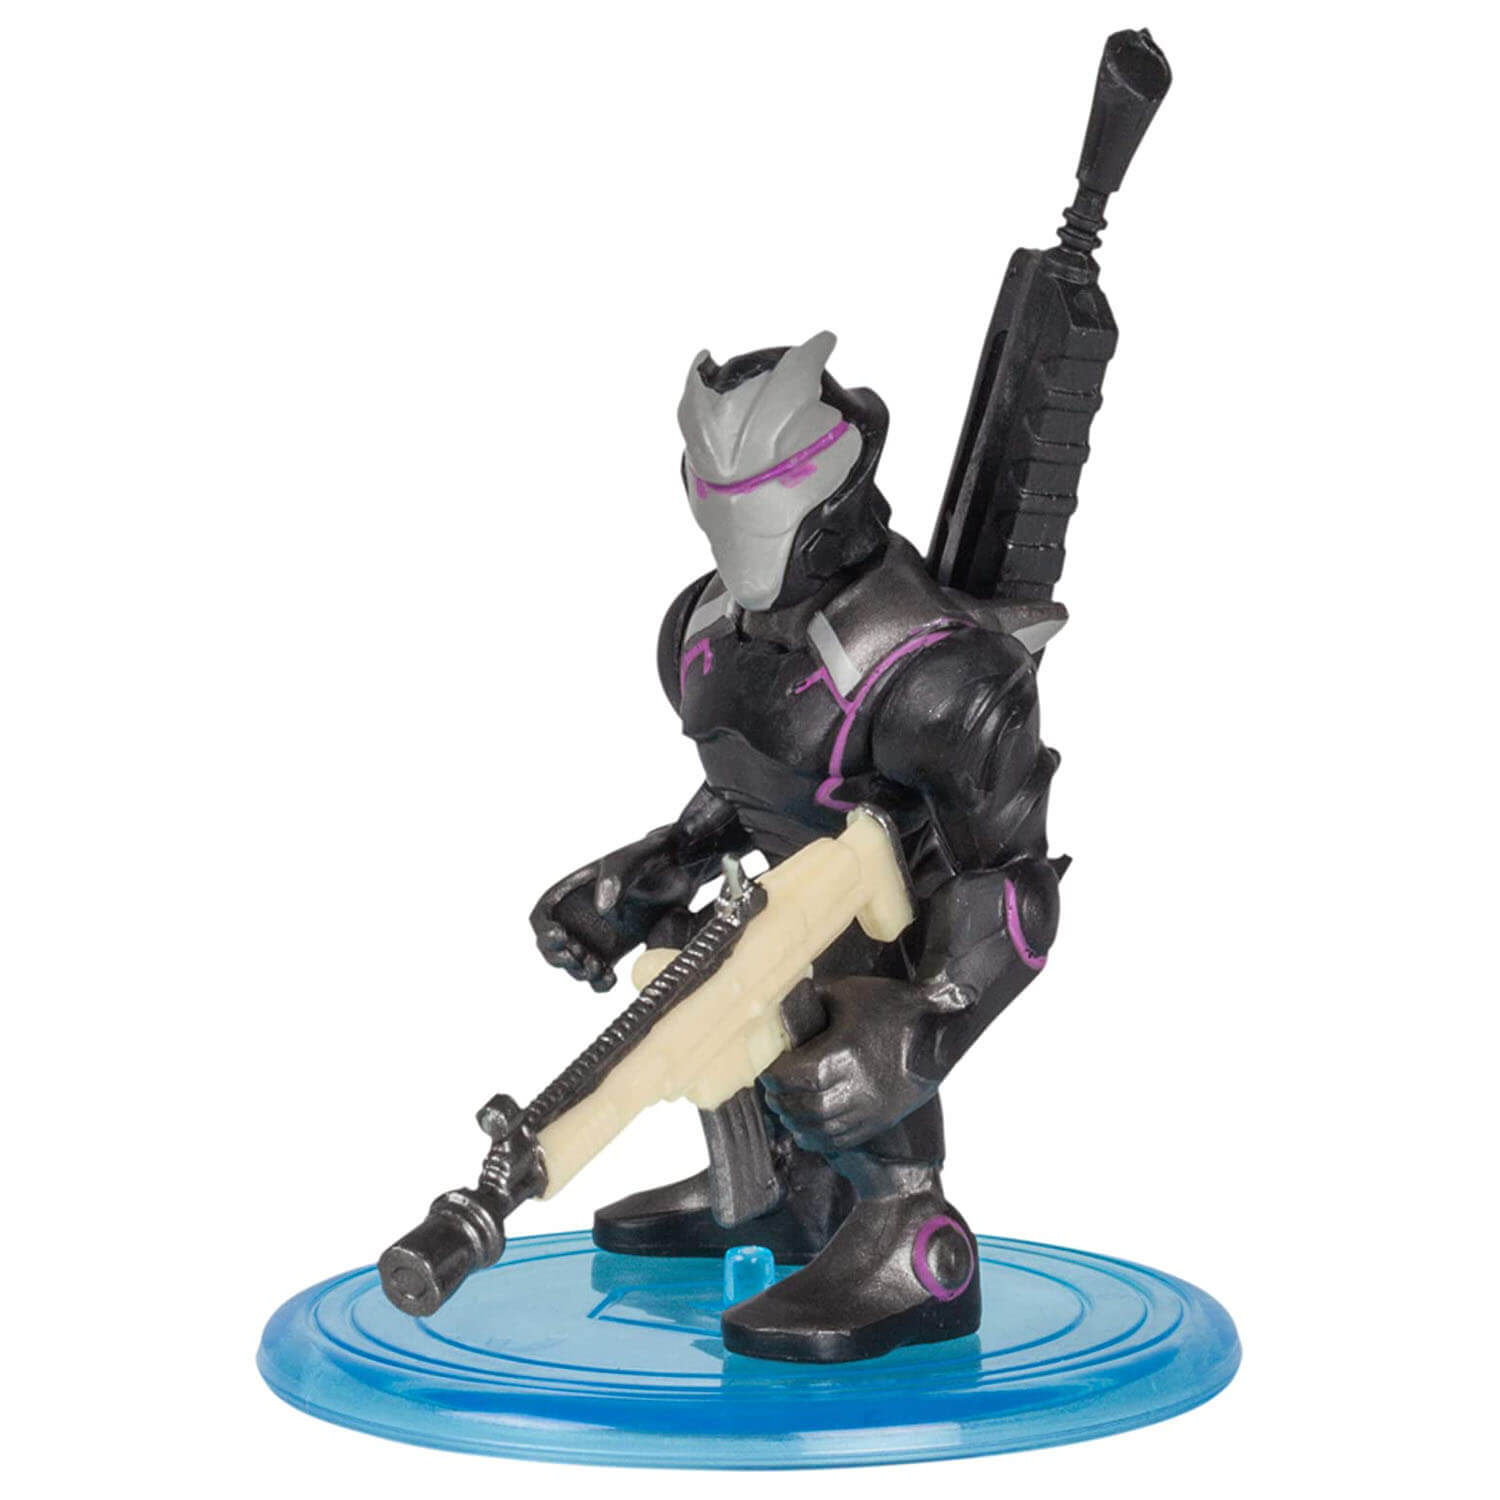 Side view of a fortnite figure.